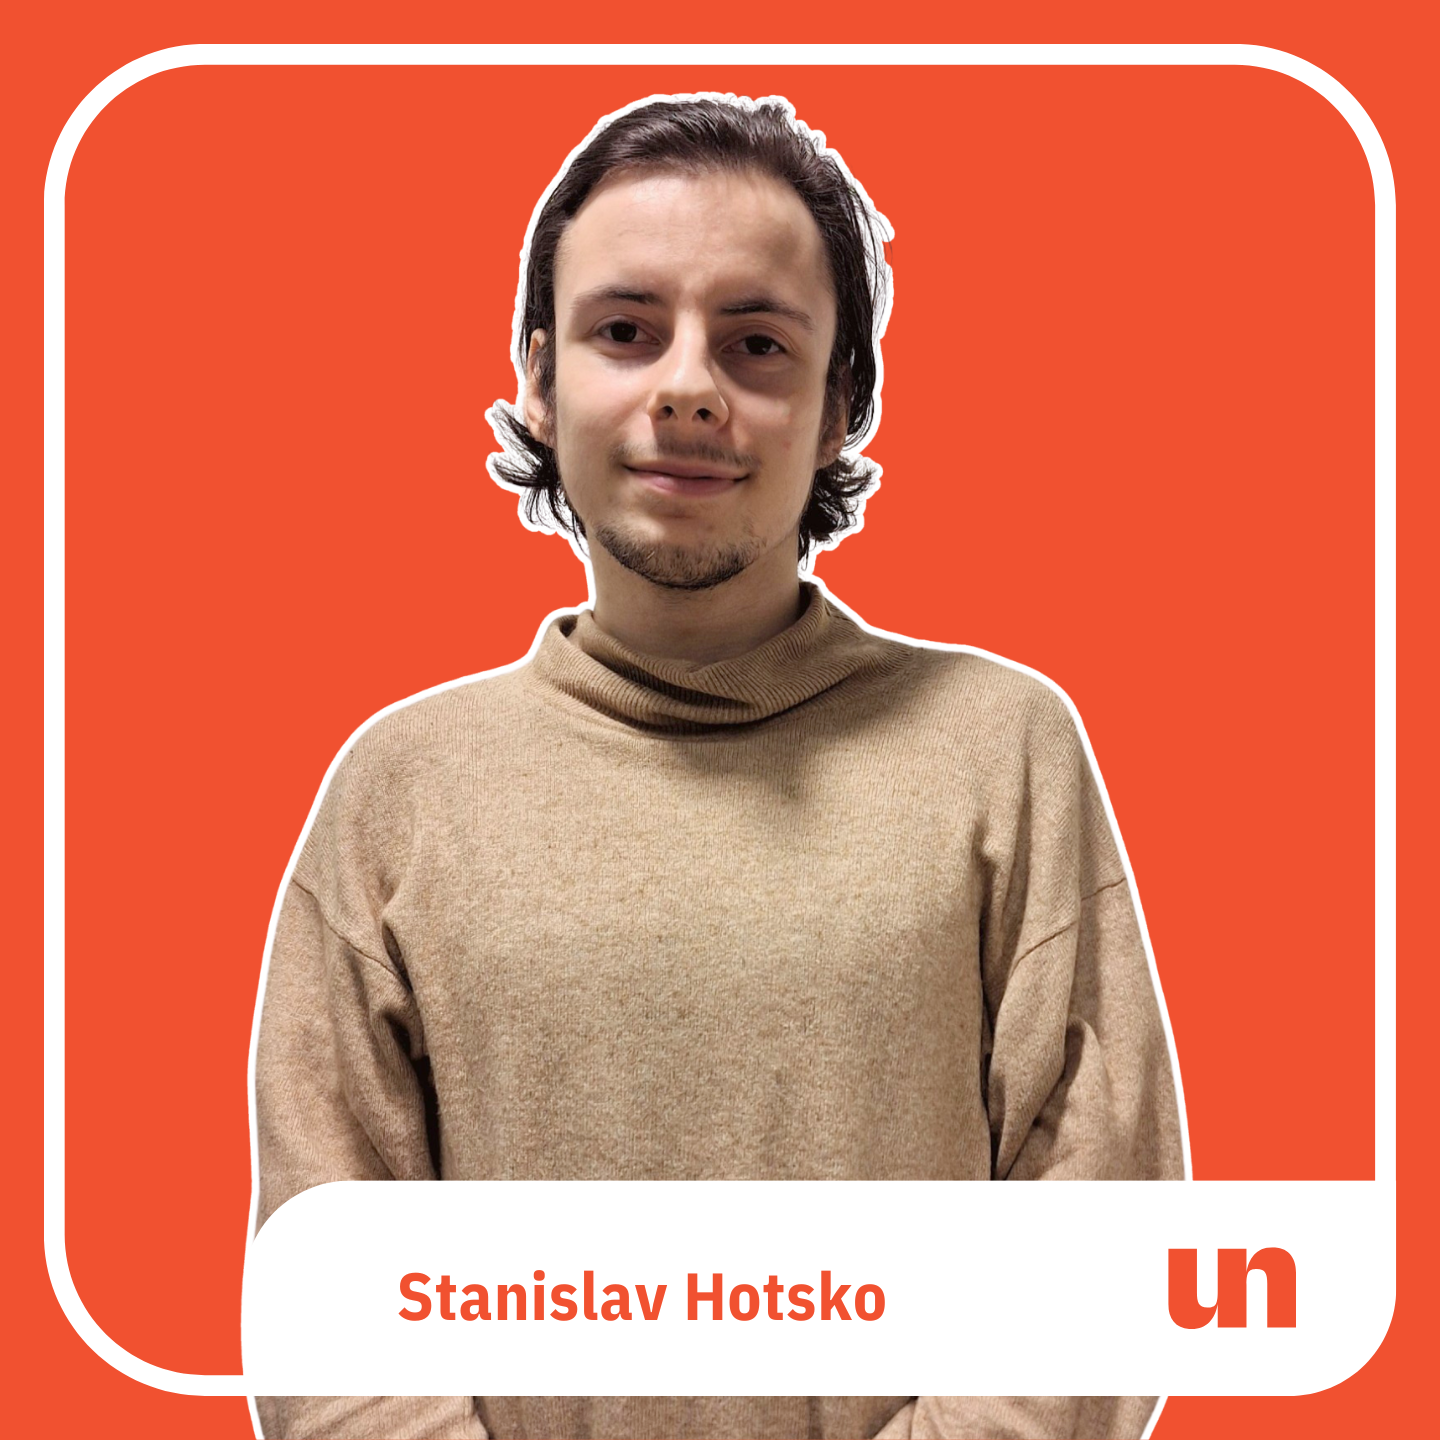 CLICK TO READ MORE ABOUT STANISLAV